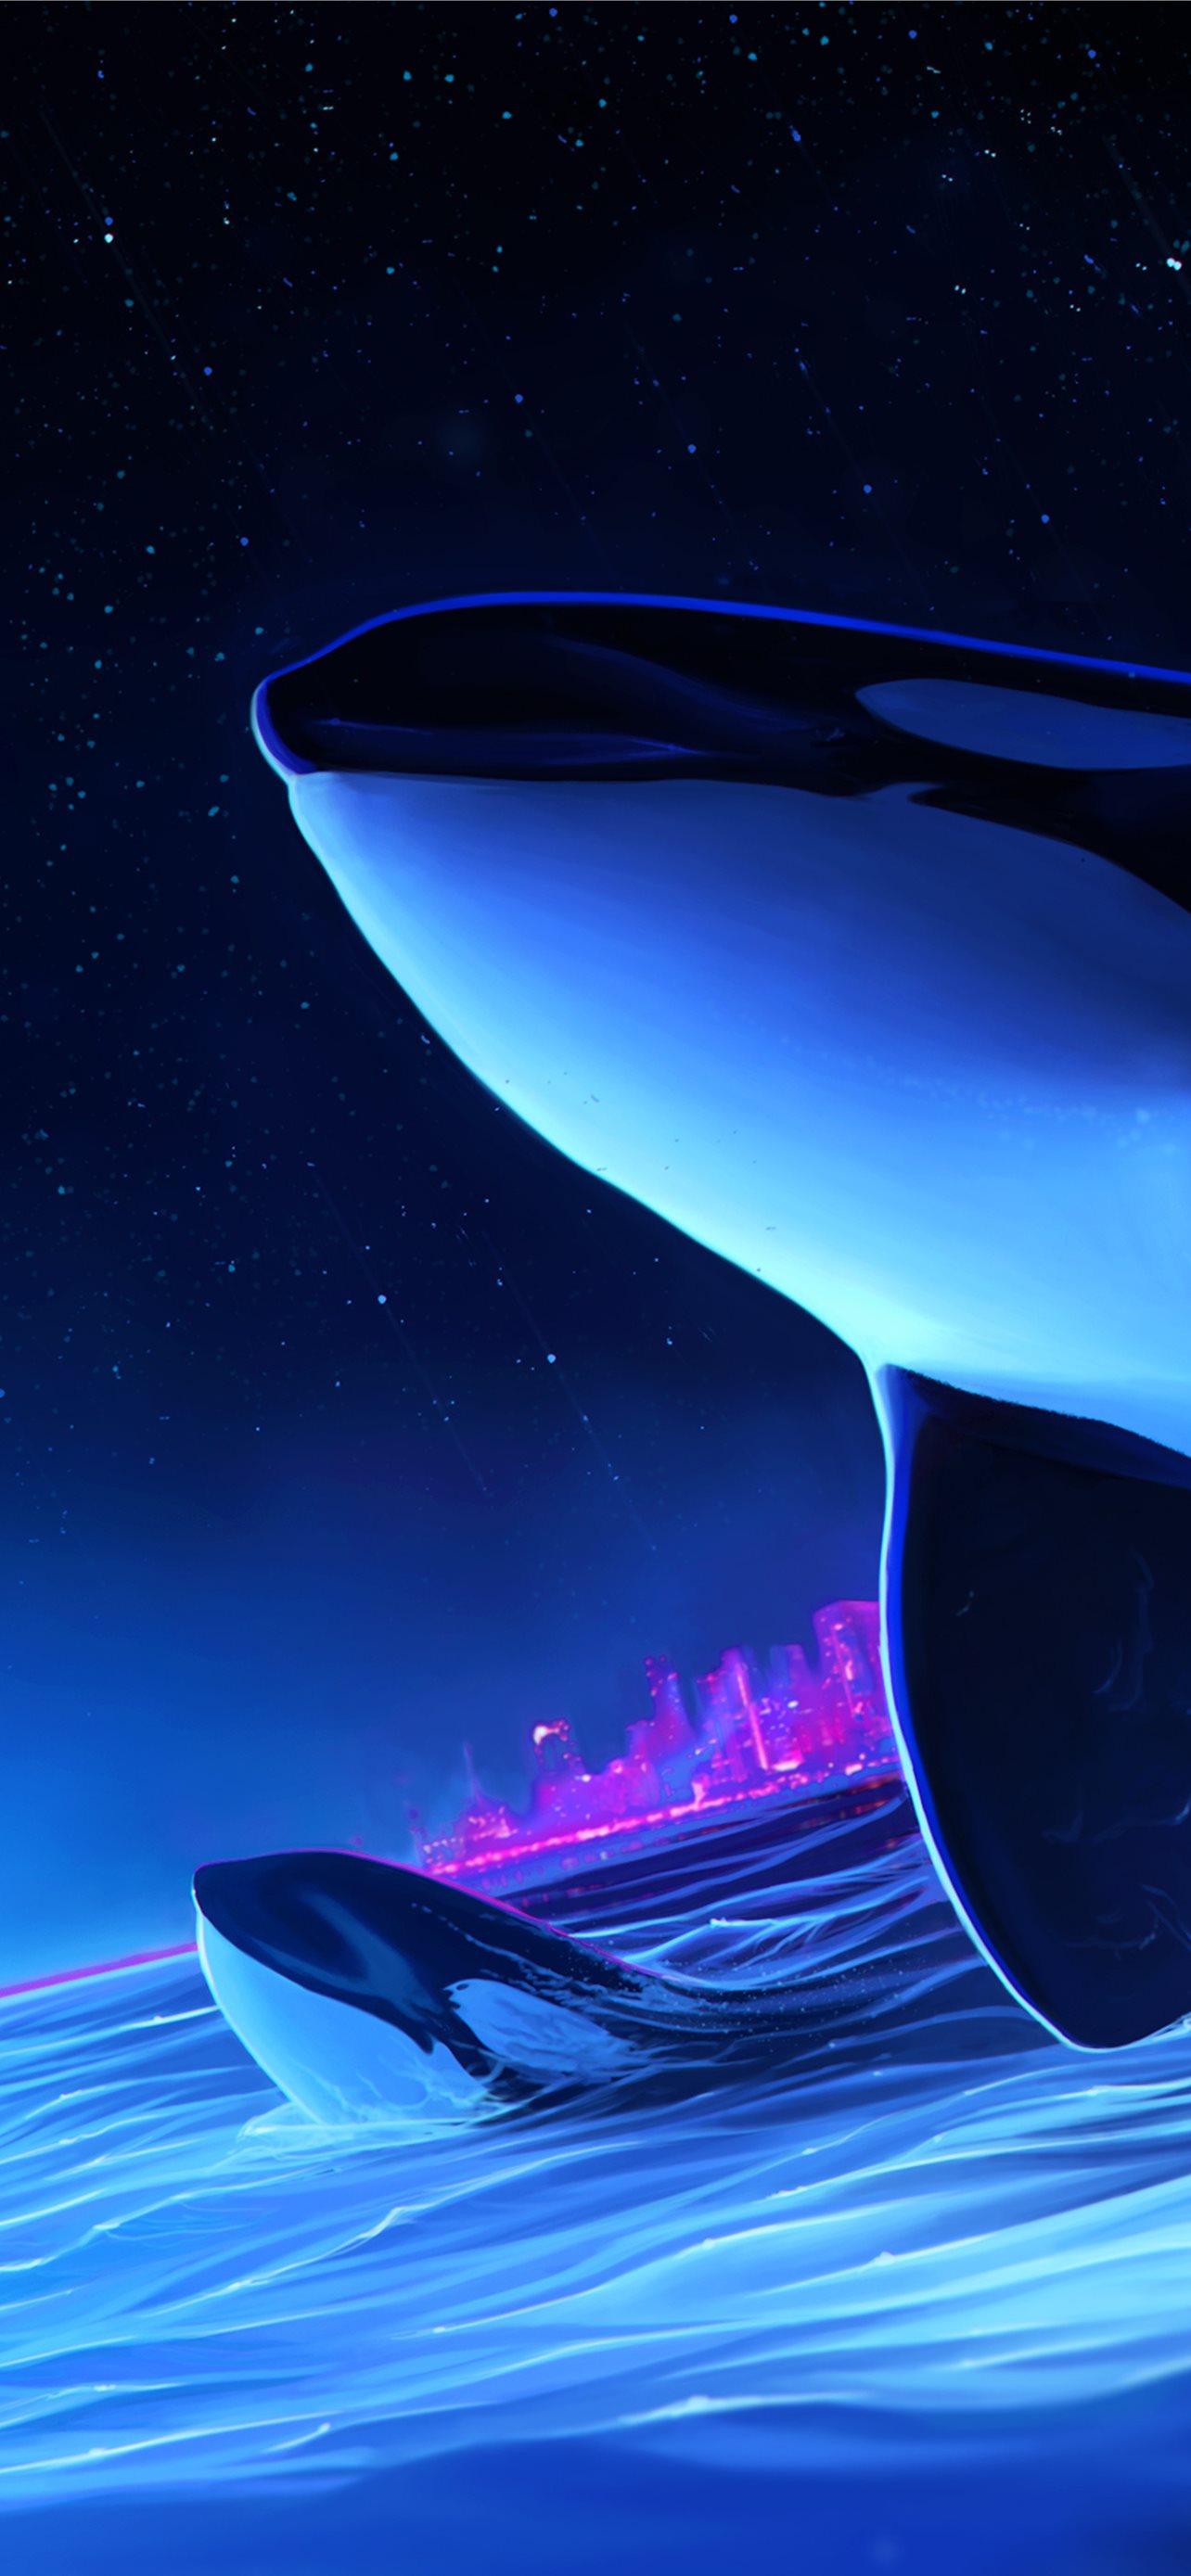 Dolphin Night Orca Whale Digital Art Sony Xperia X. iPhone Wallpaper Free Download